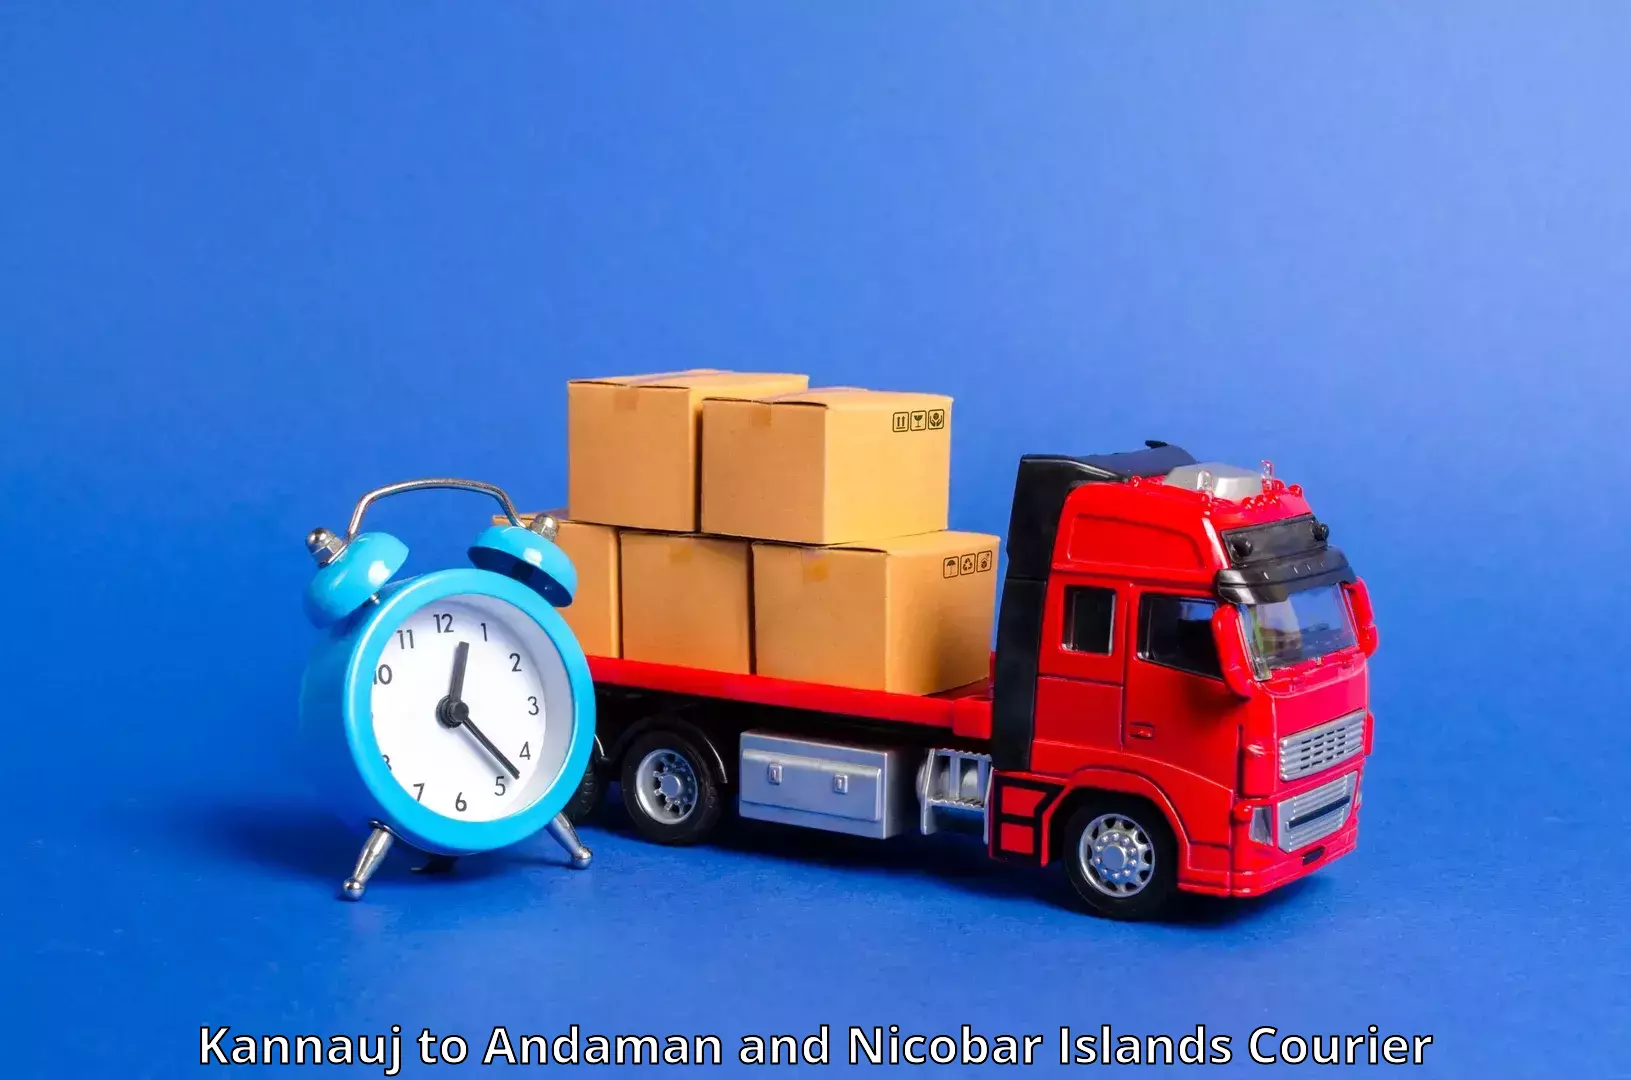 Courier service innovation Kannauj to North And Middle Andaman